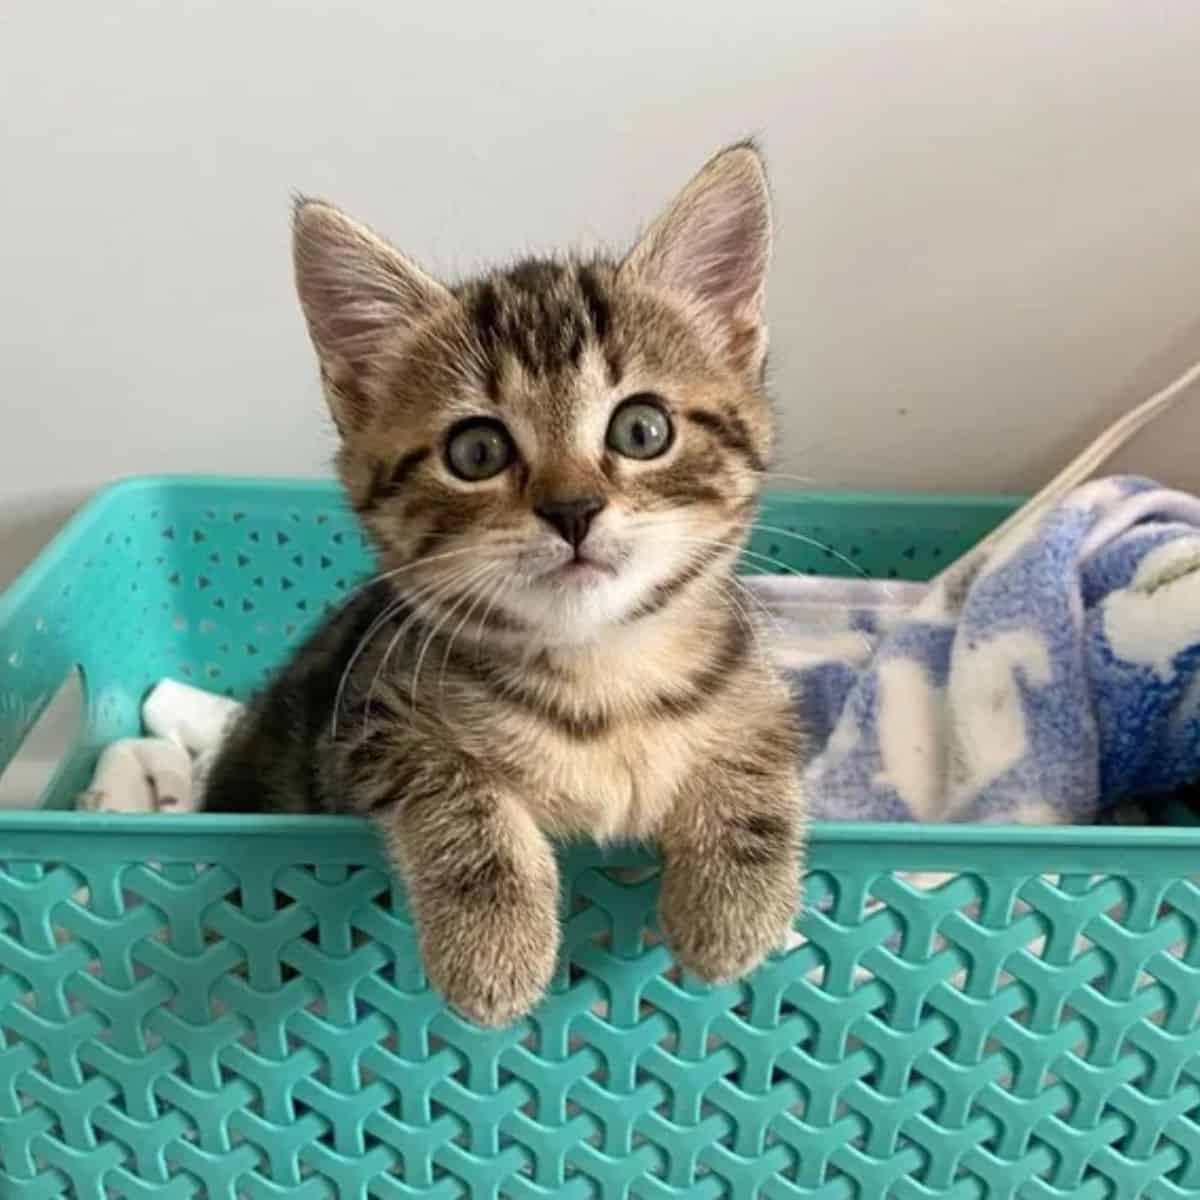 a kitten leaning on a basket is looking at the camera